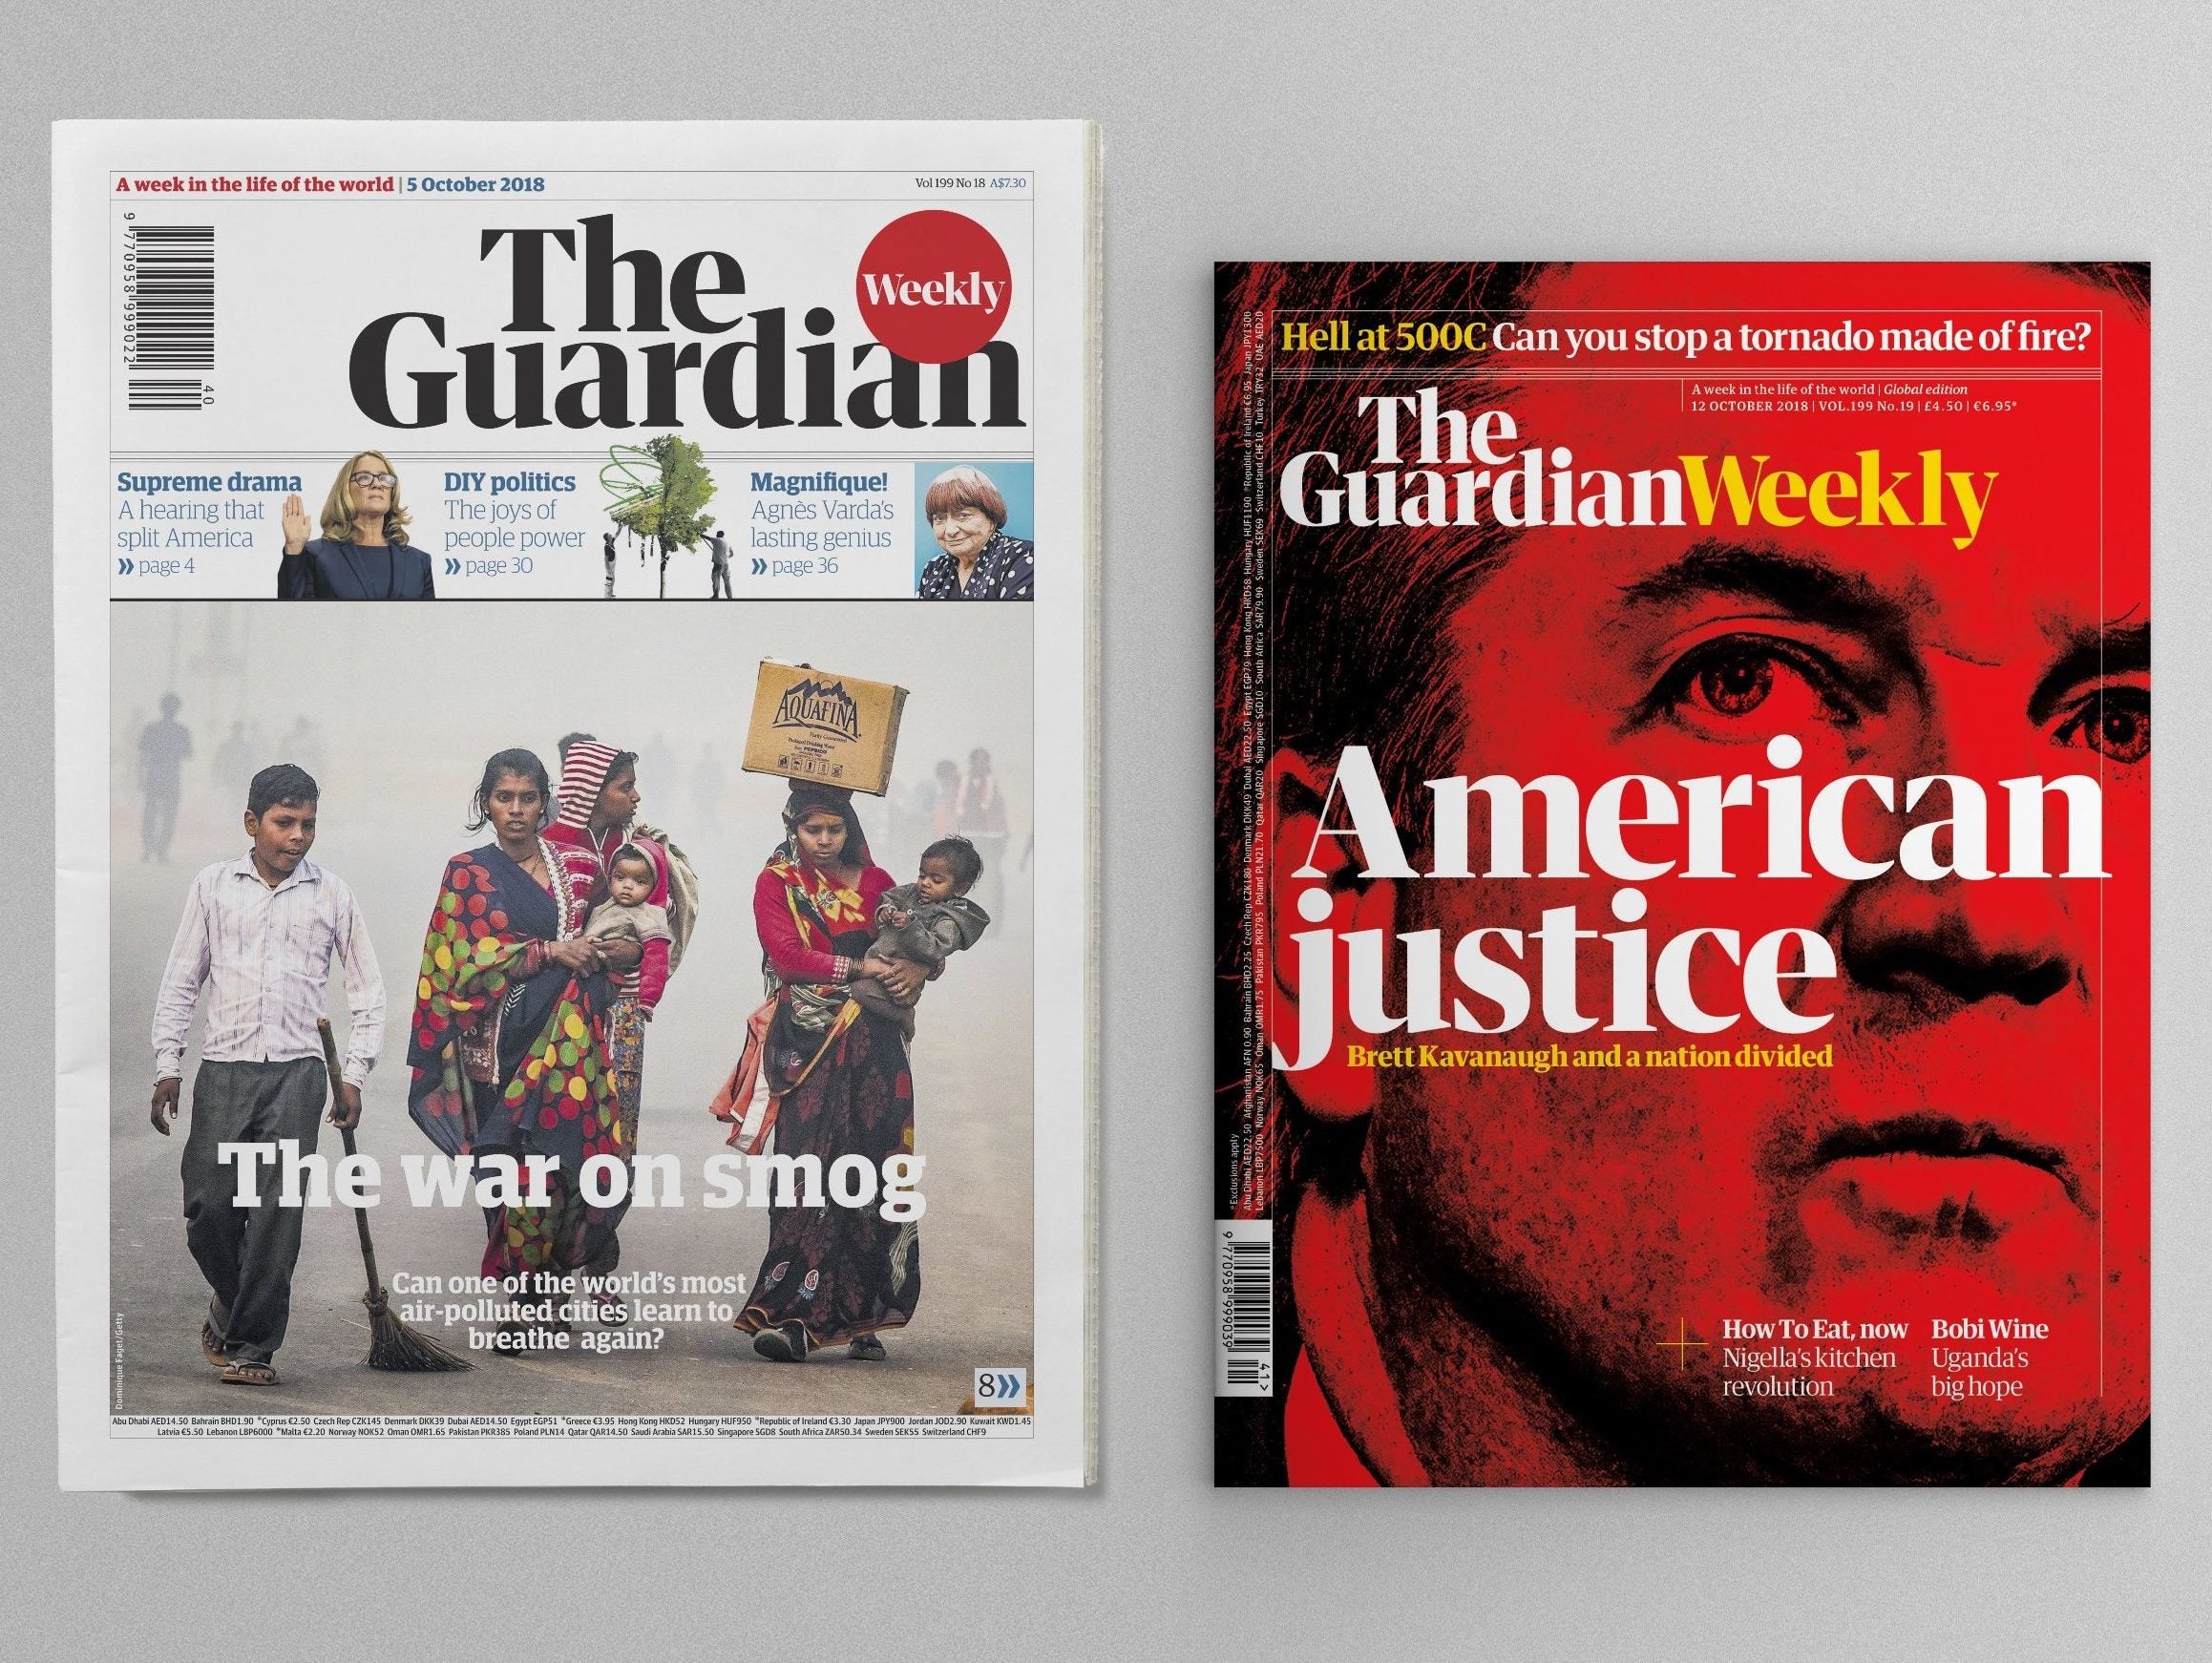 Guardian Weekly's relaunch as news magazine 'not a crazy new venture but an evolution' as cover price hiked by £1.60